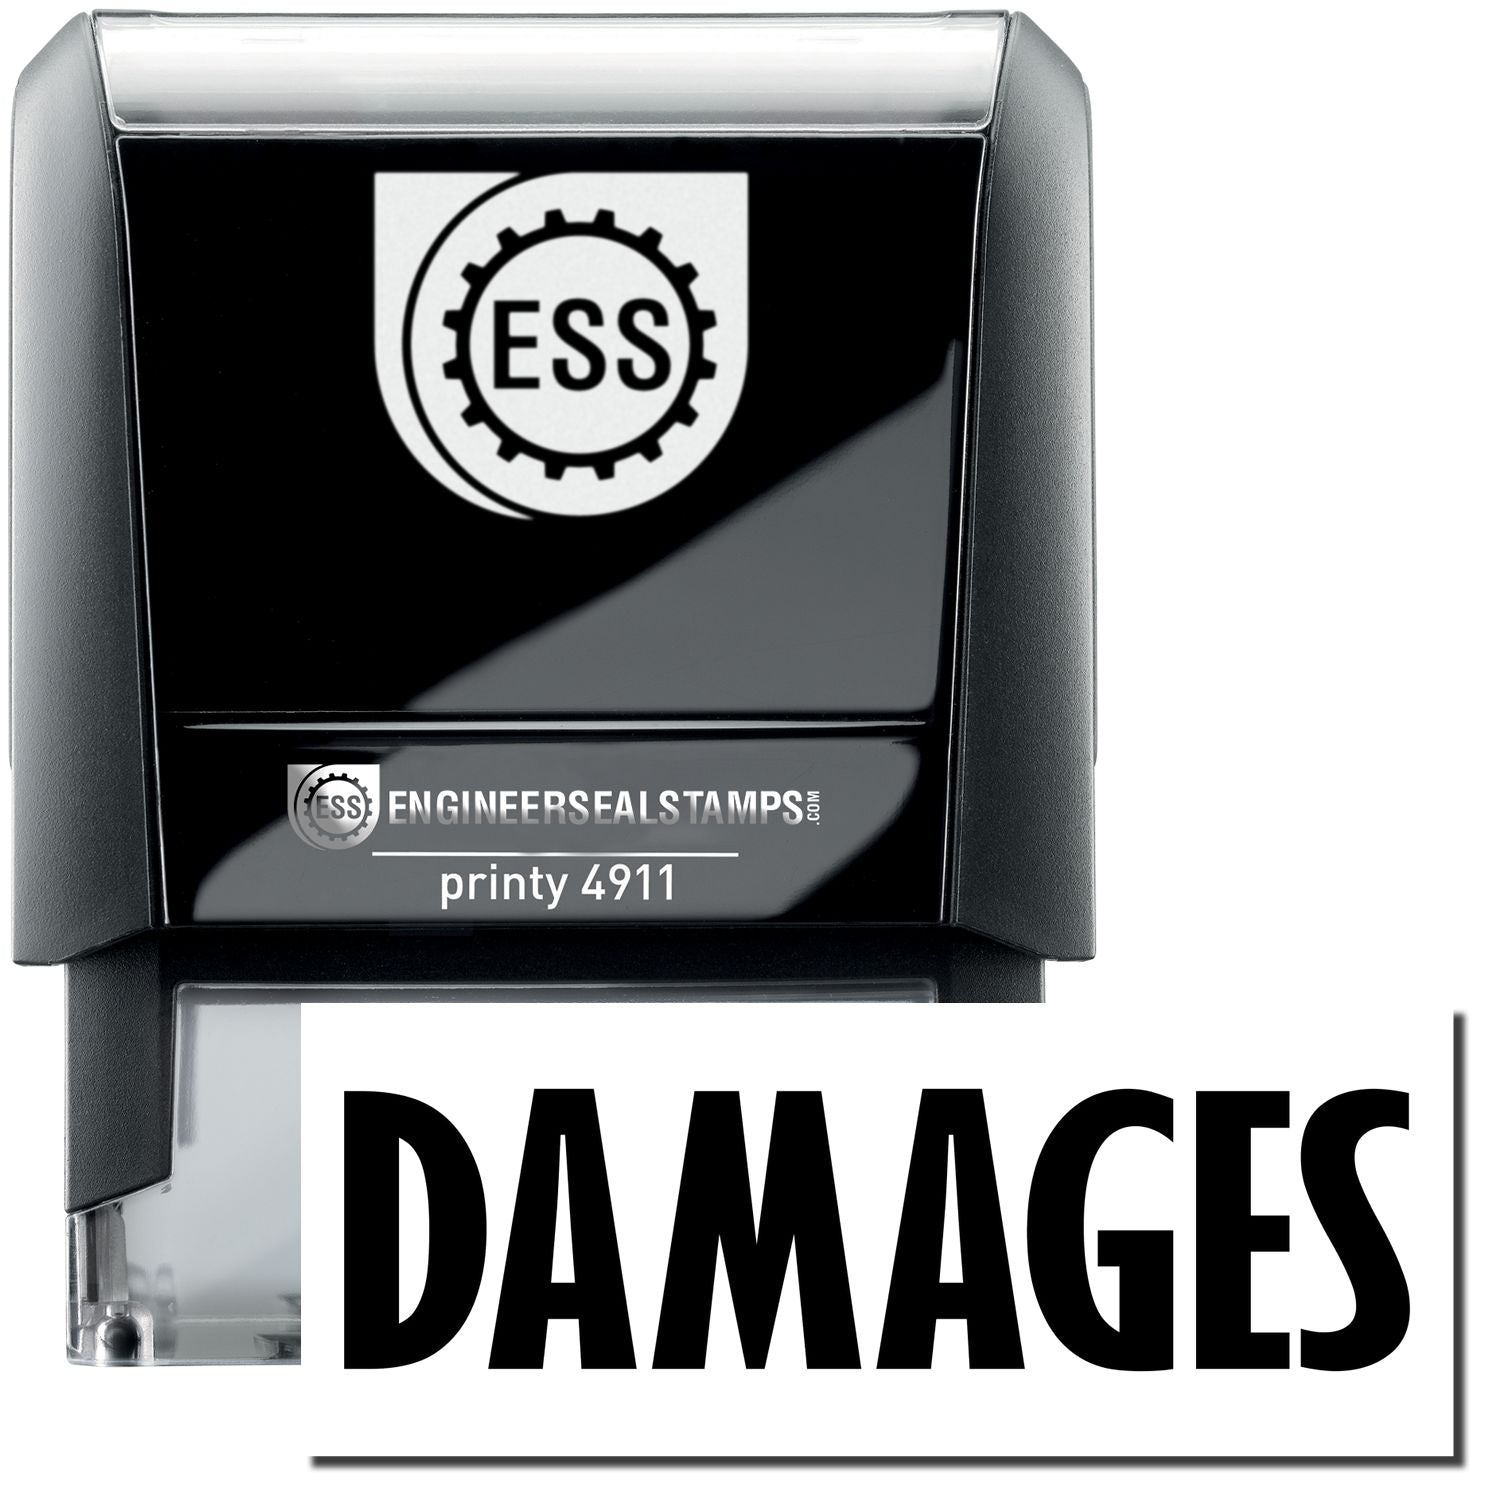 A self-inking stamp with a stamped image showing how the text "DAMAGES" is displayed after stamping.